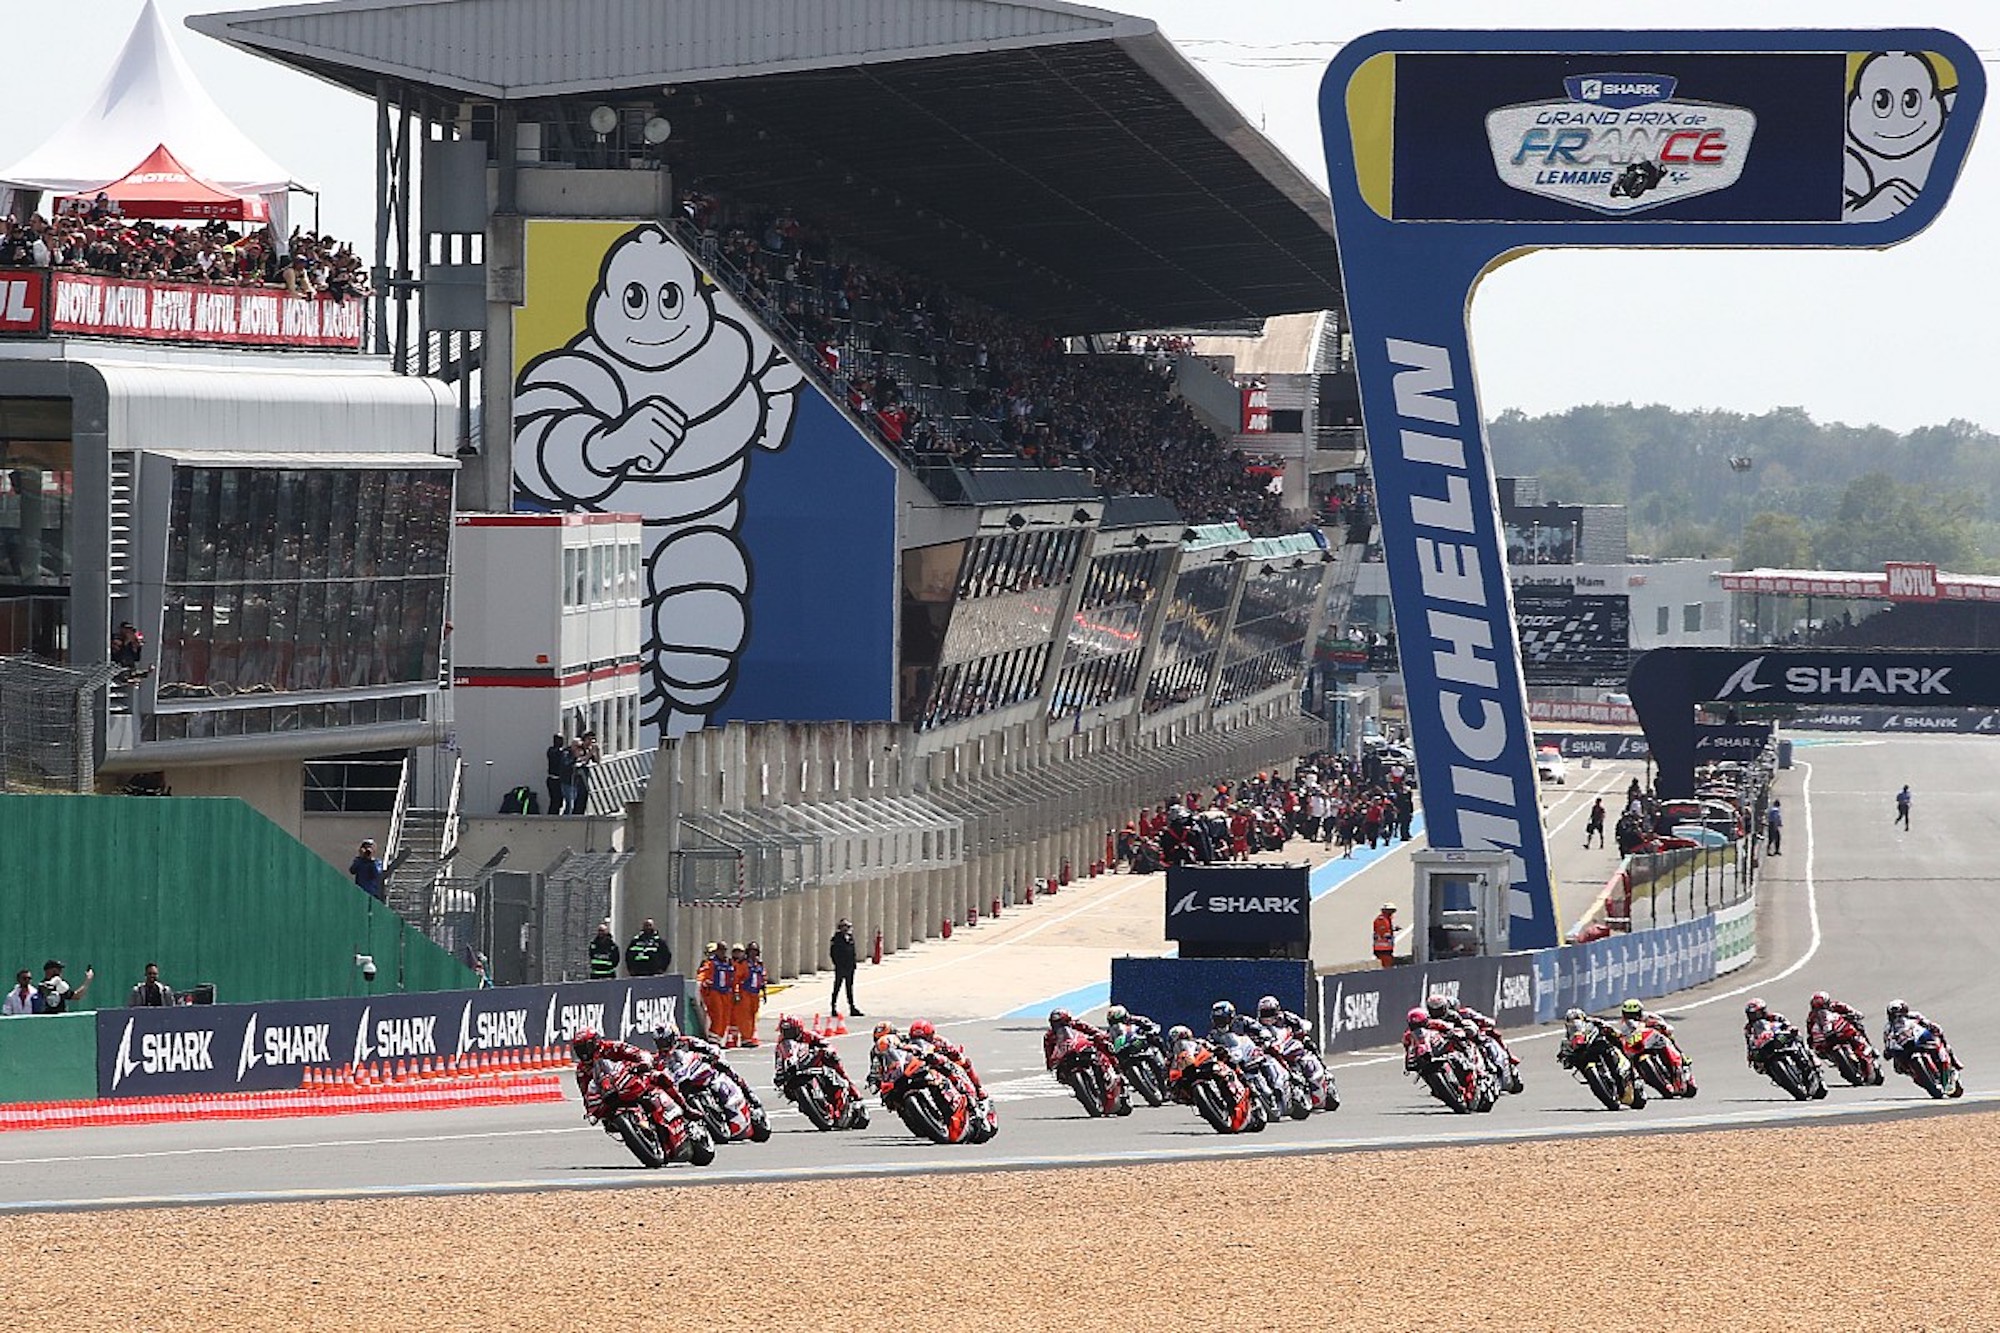 1000 and counting: Le Mans to host 1000th Grand Prix!